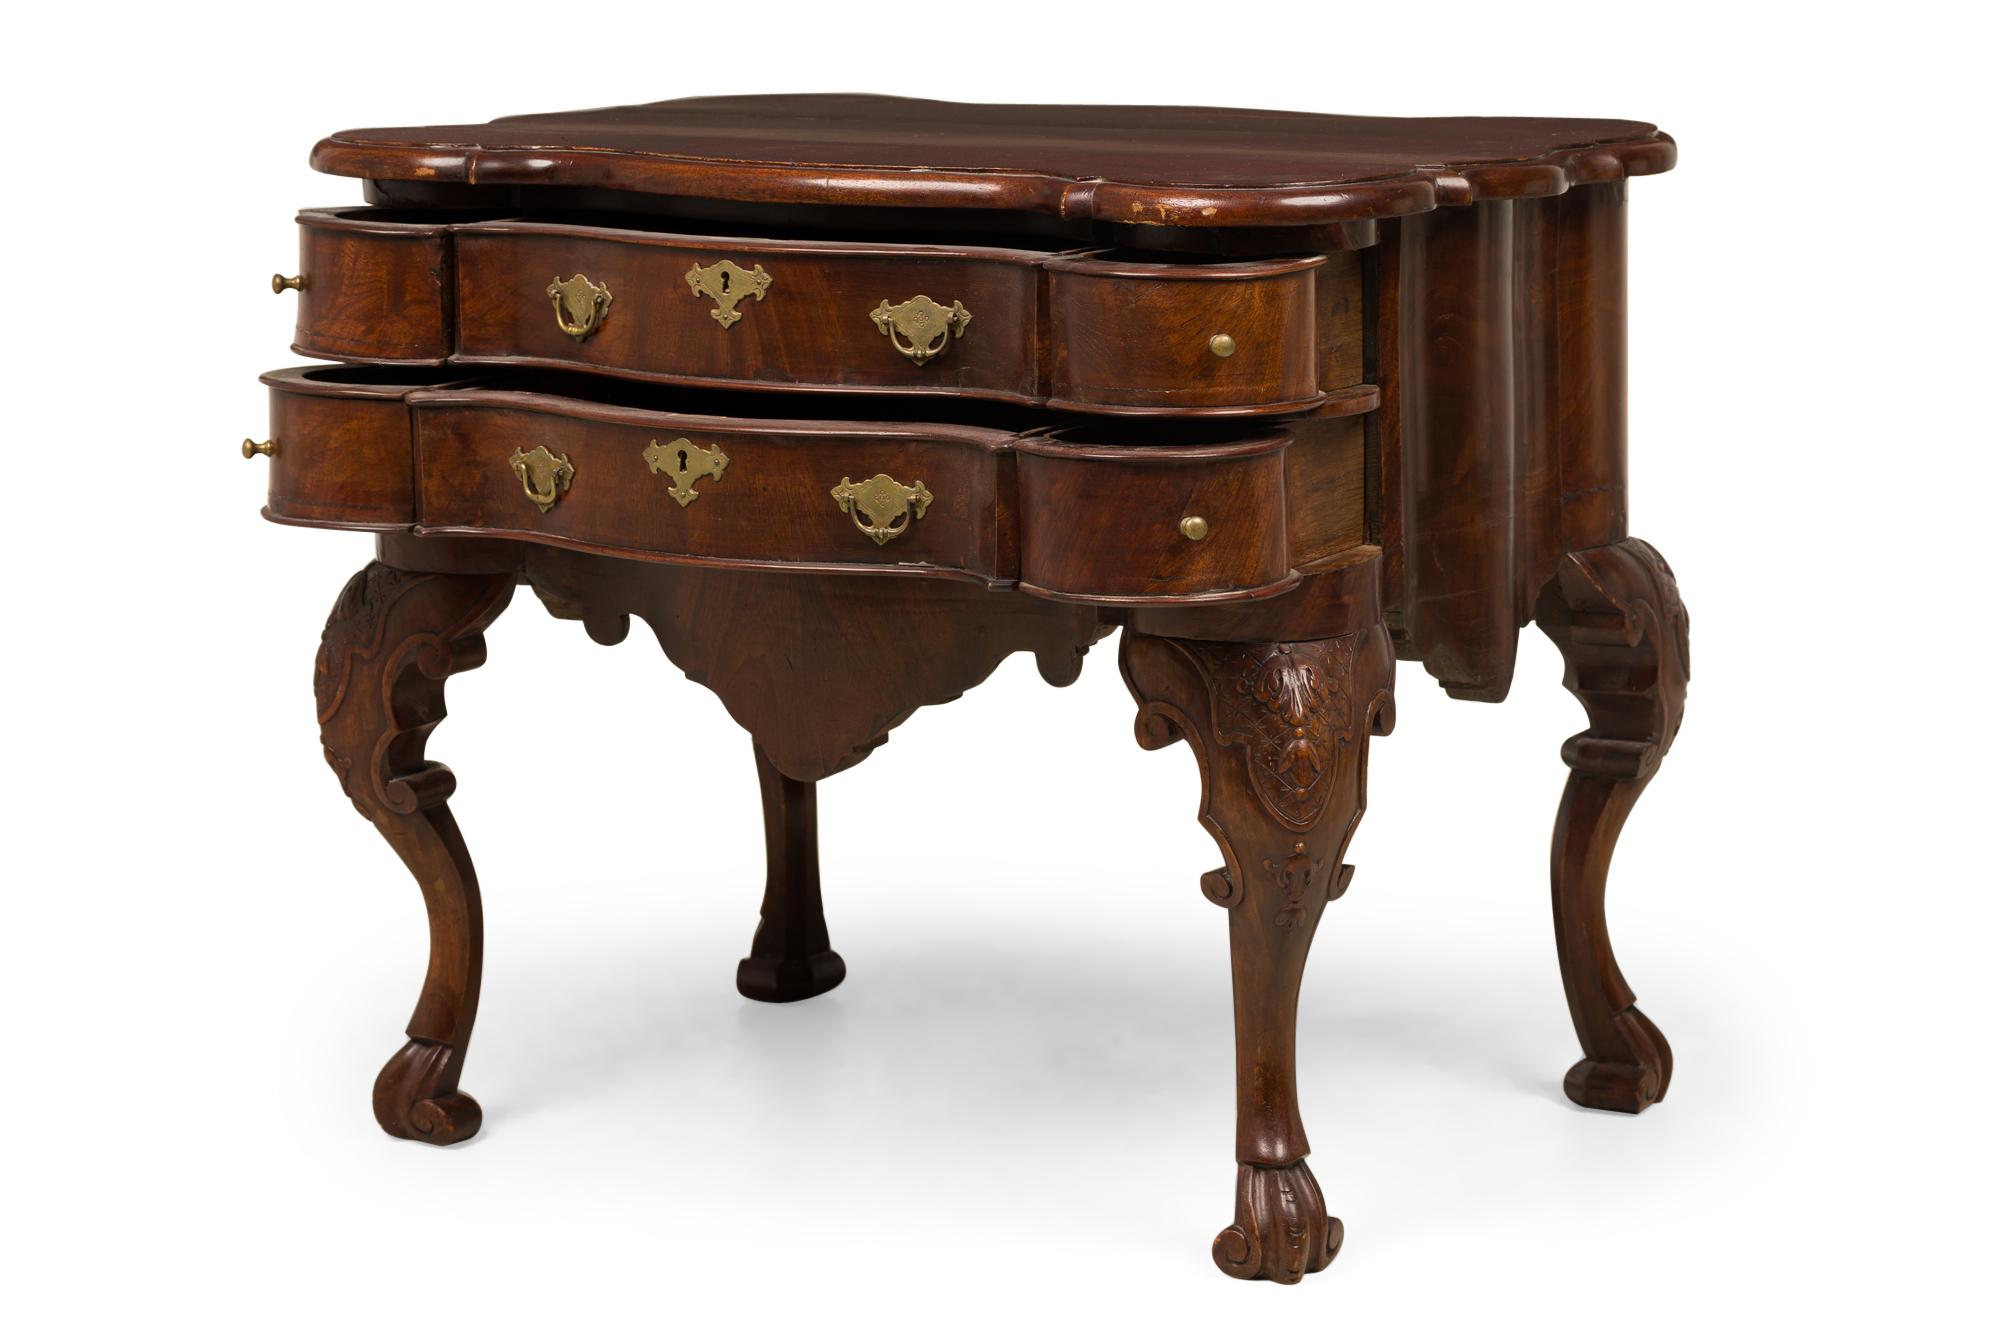 Dutch Continental 18th Century Center Table with 6 Drawers For Sale 1